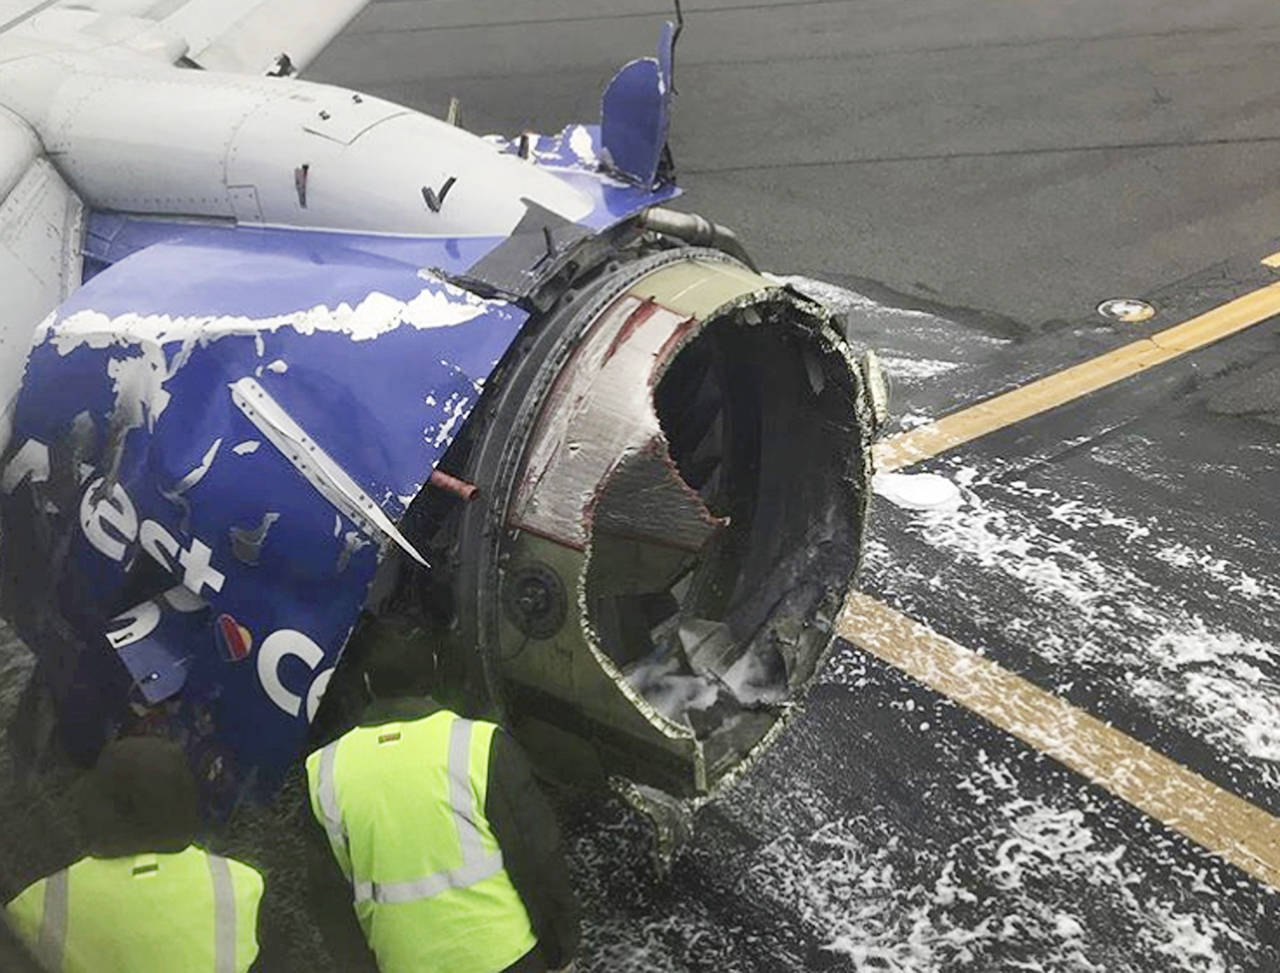 The engine on a Southwest Airlines plane is inspected as it sits on the runway at the Philadelphia International Airport after it made an emergency landing in Philadelphia on Tuesday. (Amanda Bourman via AP)